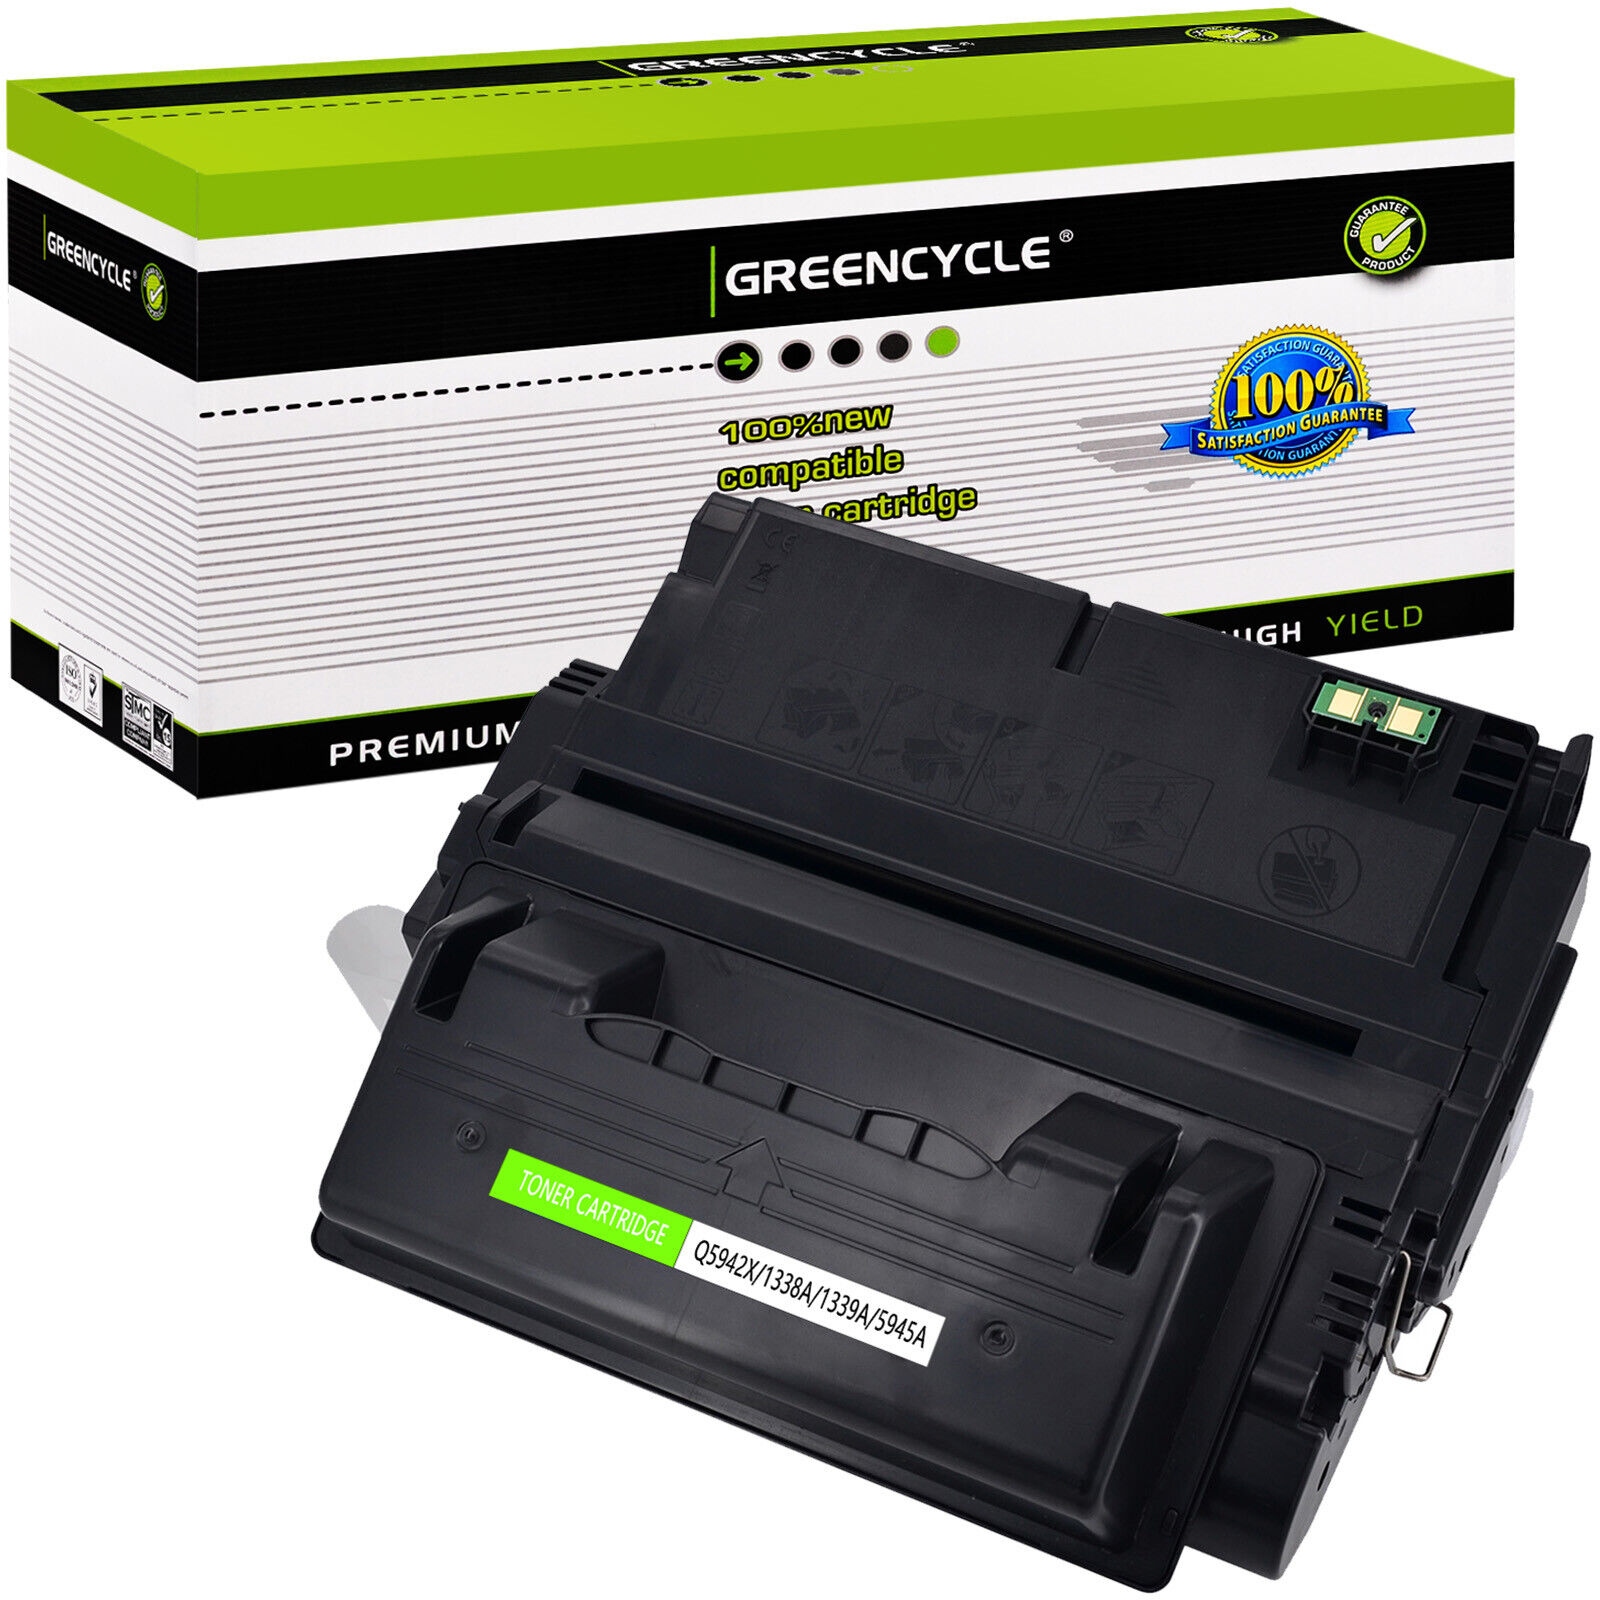 Compatible with HP 39A Q1339A Toner Cartridge for Laserjet 4300 4300dtn 4300dtns